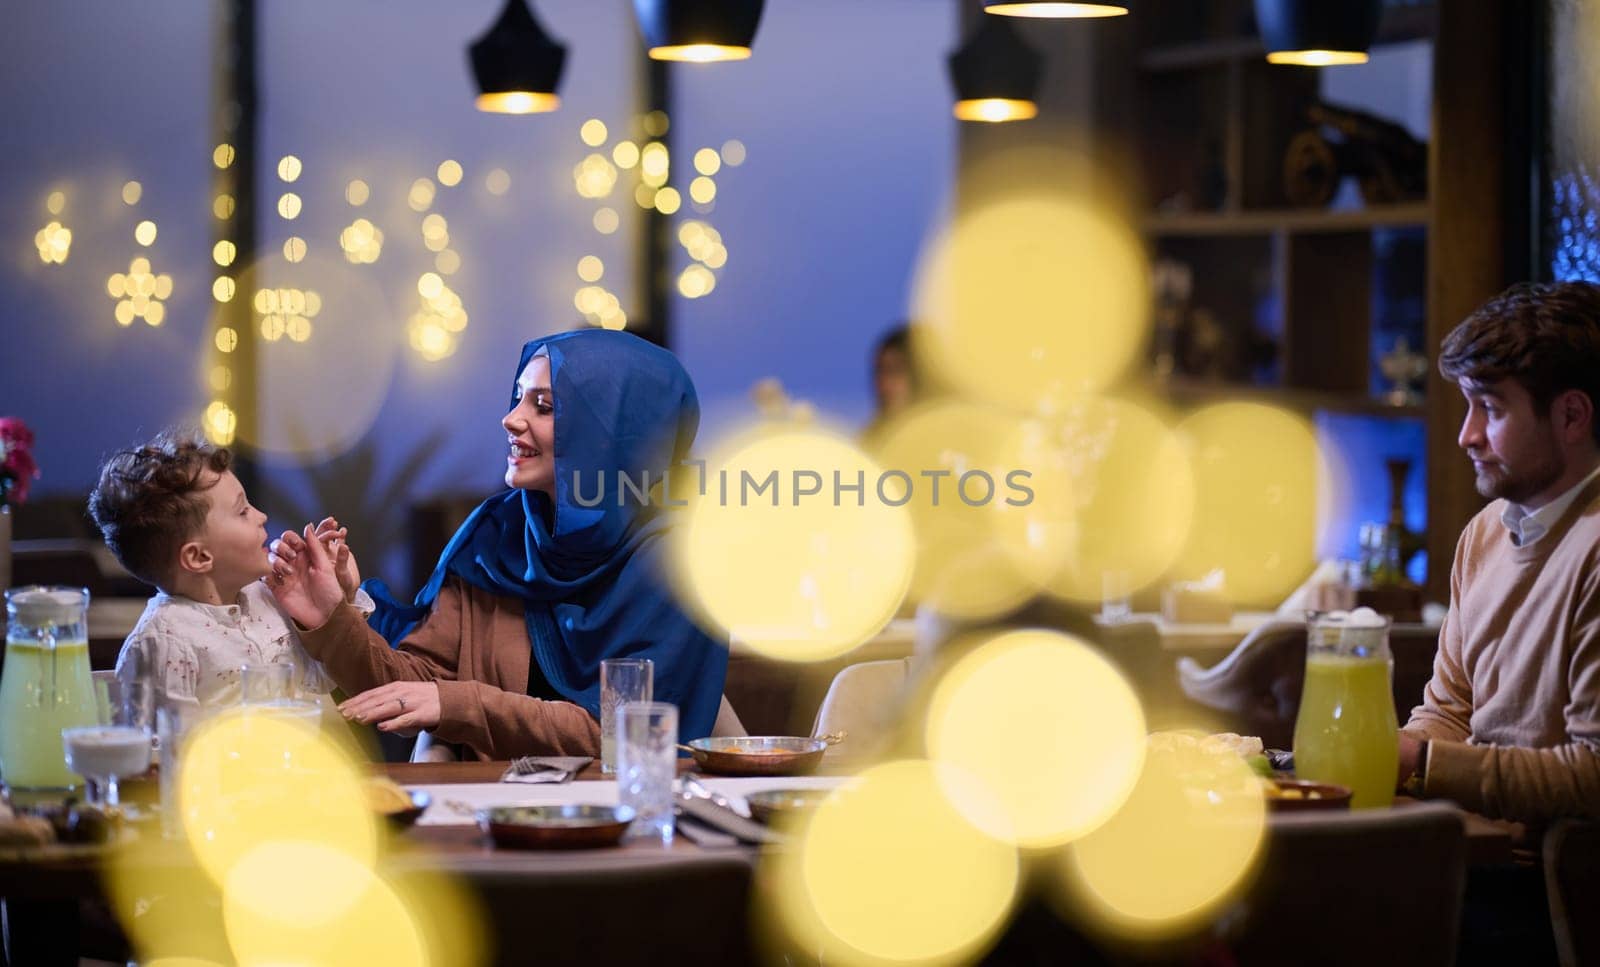 In a modern restaurant, an Islamic couple and their children joyfully await their iftar meal during the holy month of Ramadan, embodying familial harmony and cultural celebration amidst the contemporary dining ambiance.